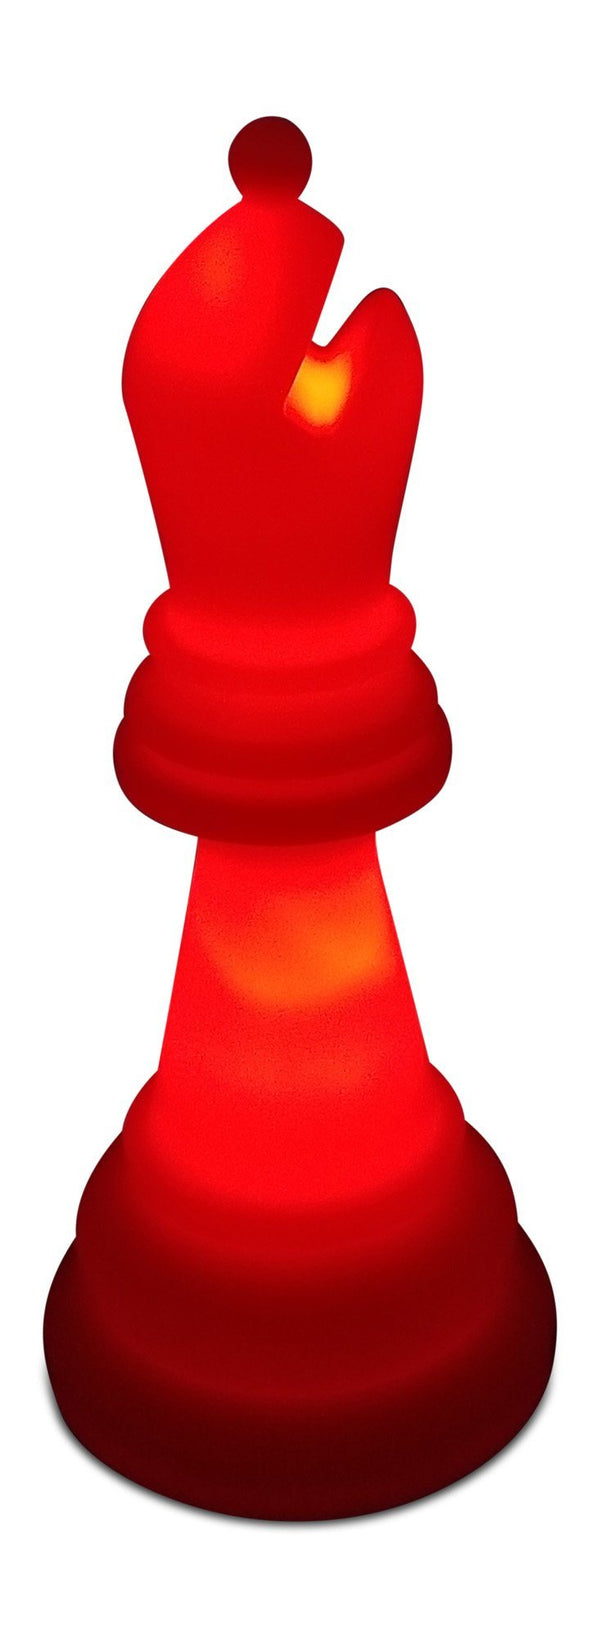 MegaChess 34 Inch Perfect Bishop Light-Up Giant Chess Piece - Red |  | MegaChess.com